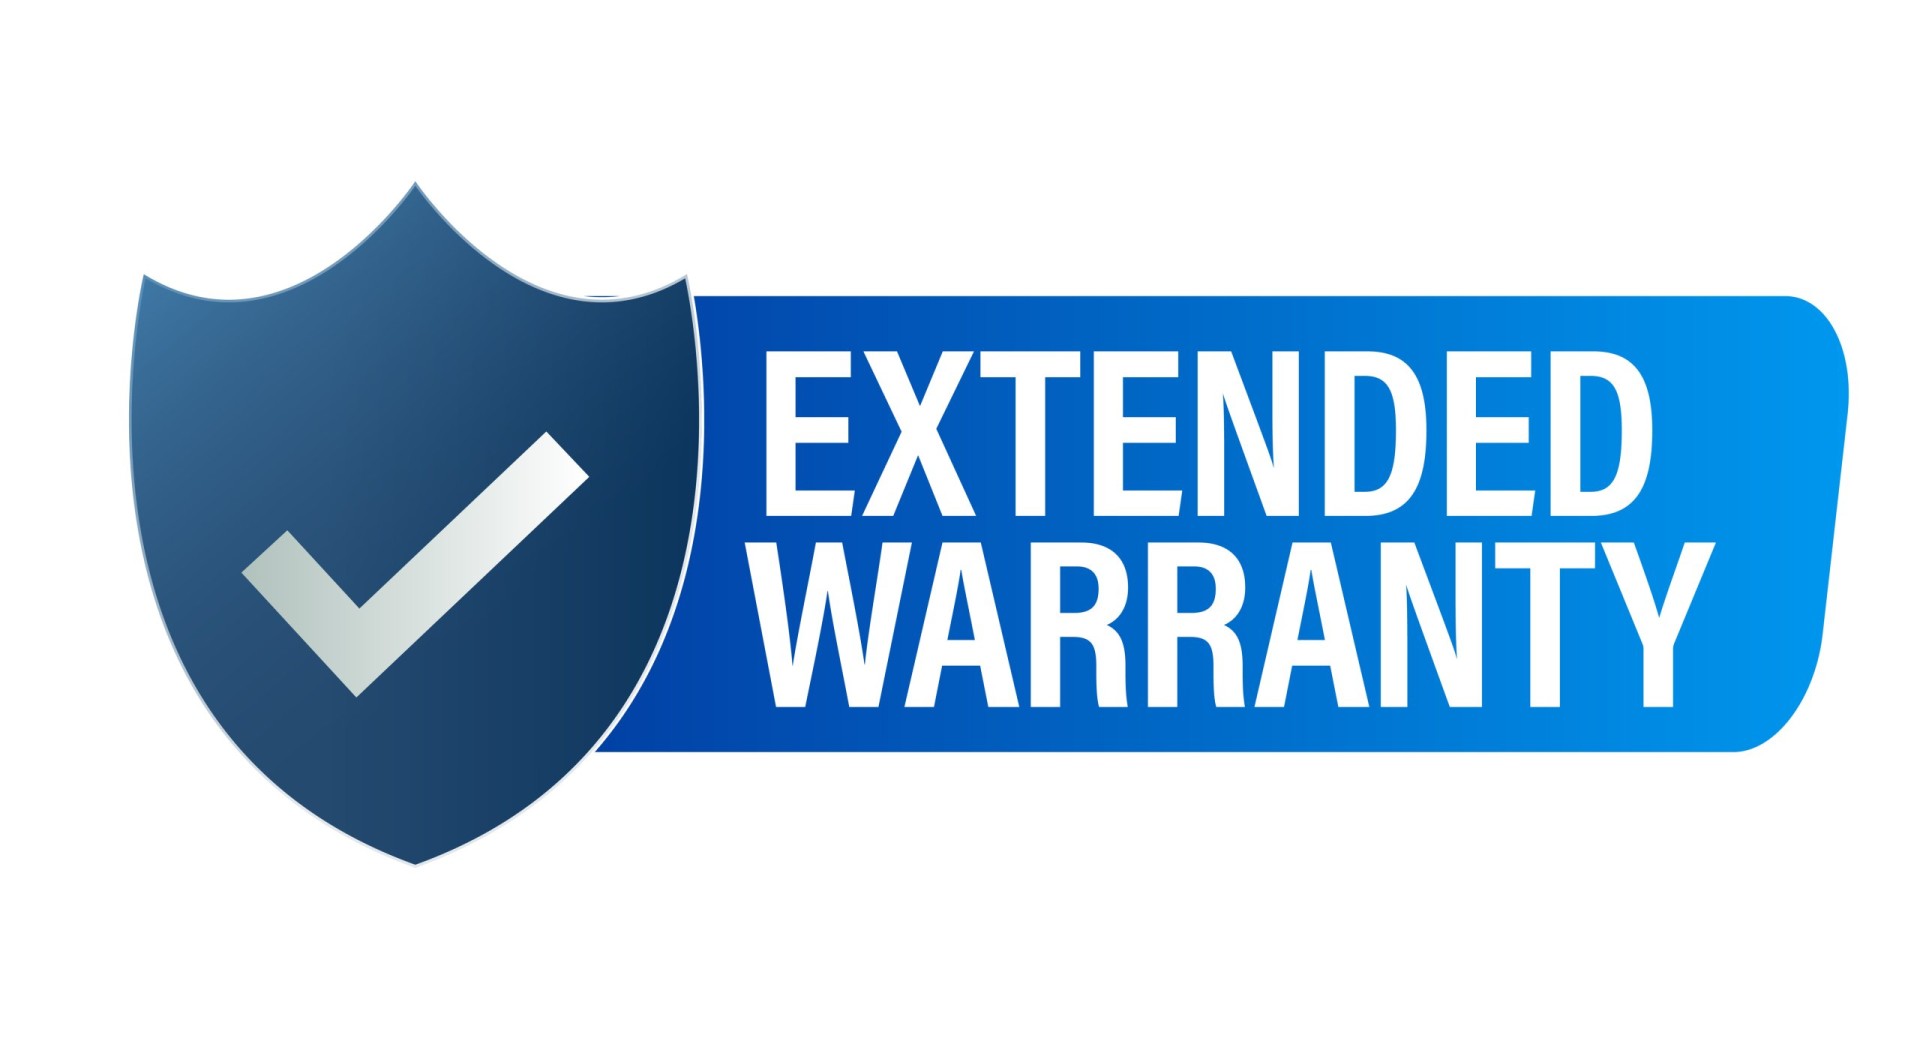 extended warranty vector icon with tick mark, blue in color